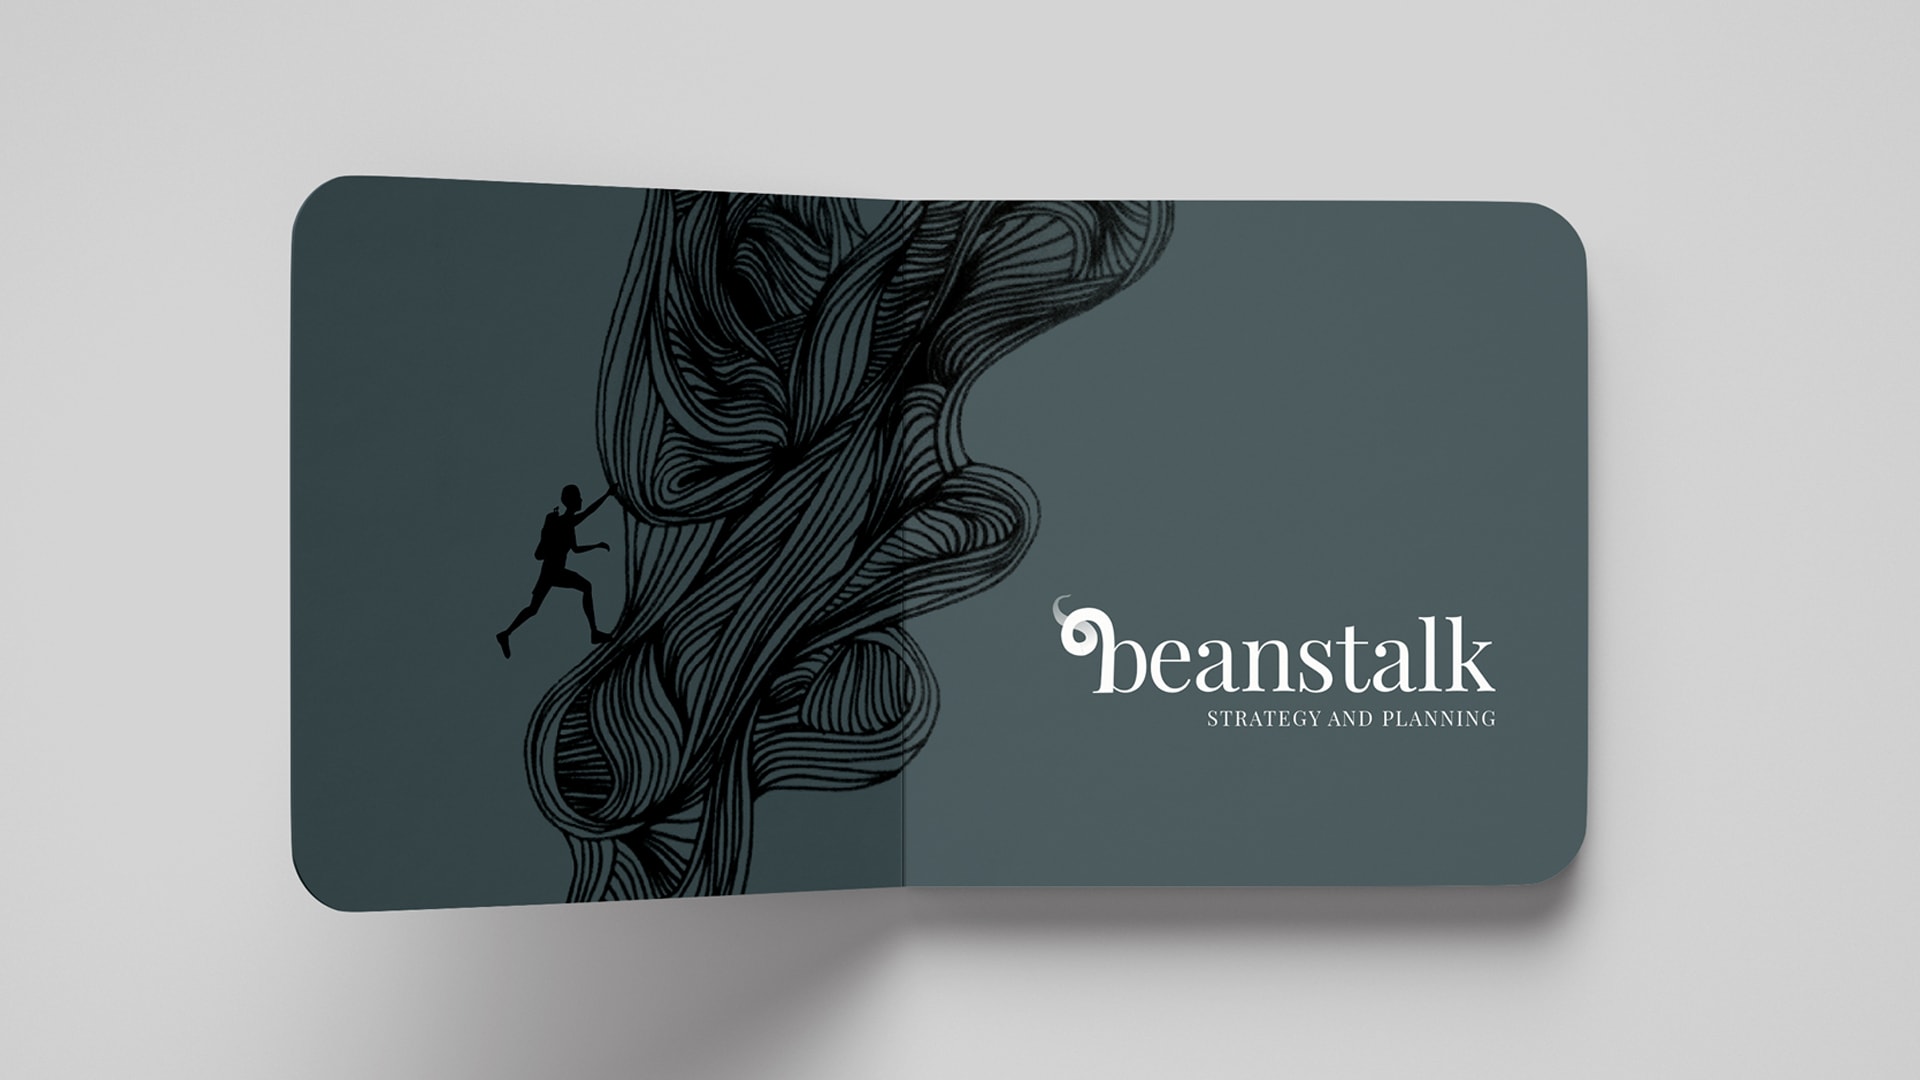 An image of an inside book cover design for a brand called Beanstalk. The design shows an illustration of a beanstalk being climbed by a man and displays the company logo